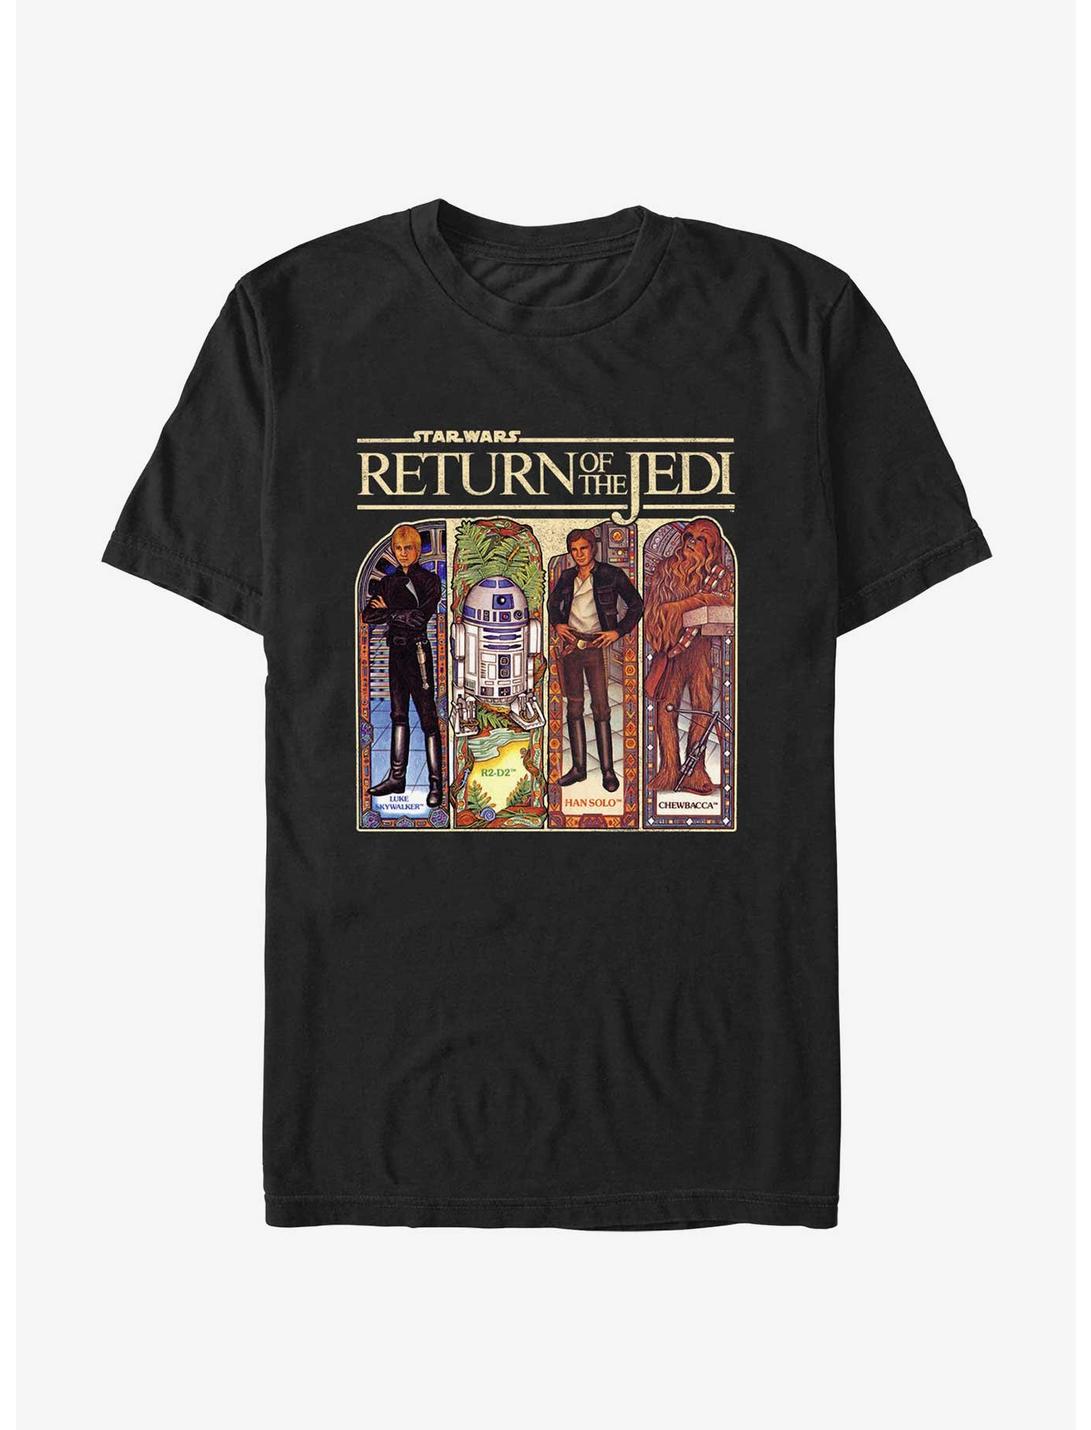 Star Wars Return Of The Jedi Stained Glass Characters T-Shirt, BLACK, hi-res